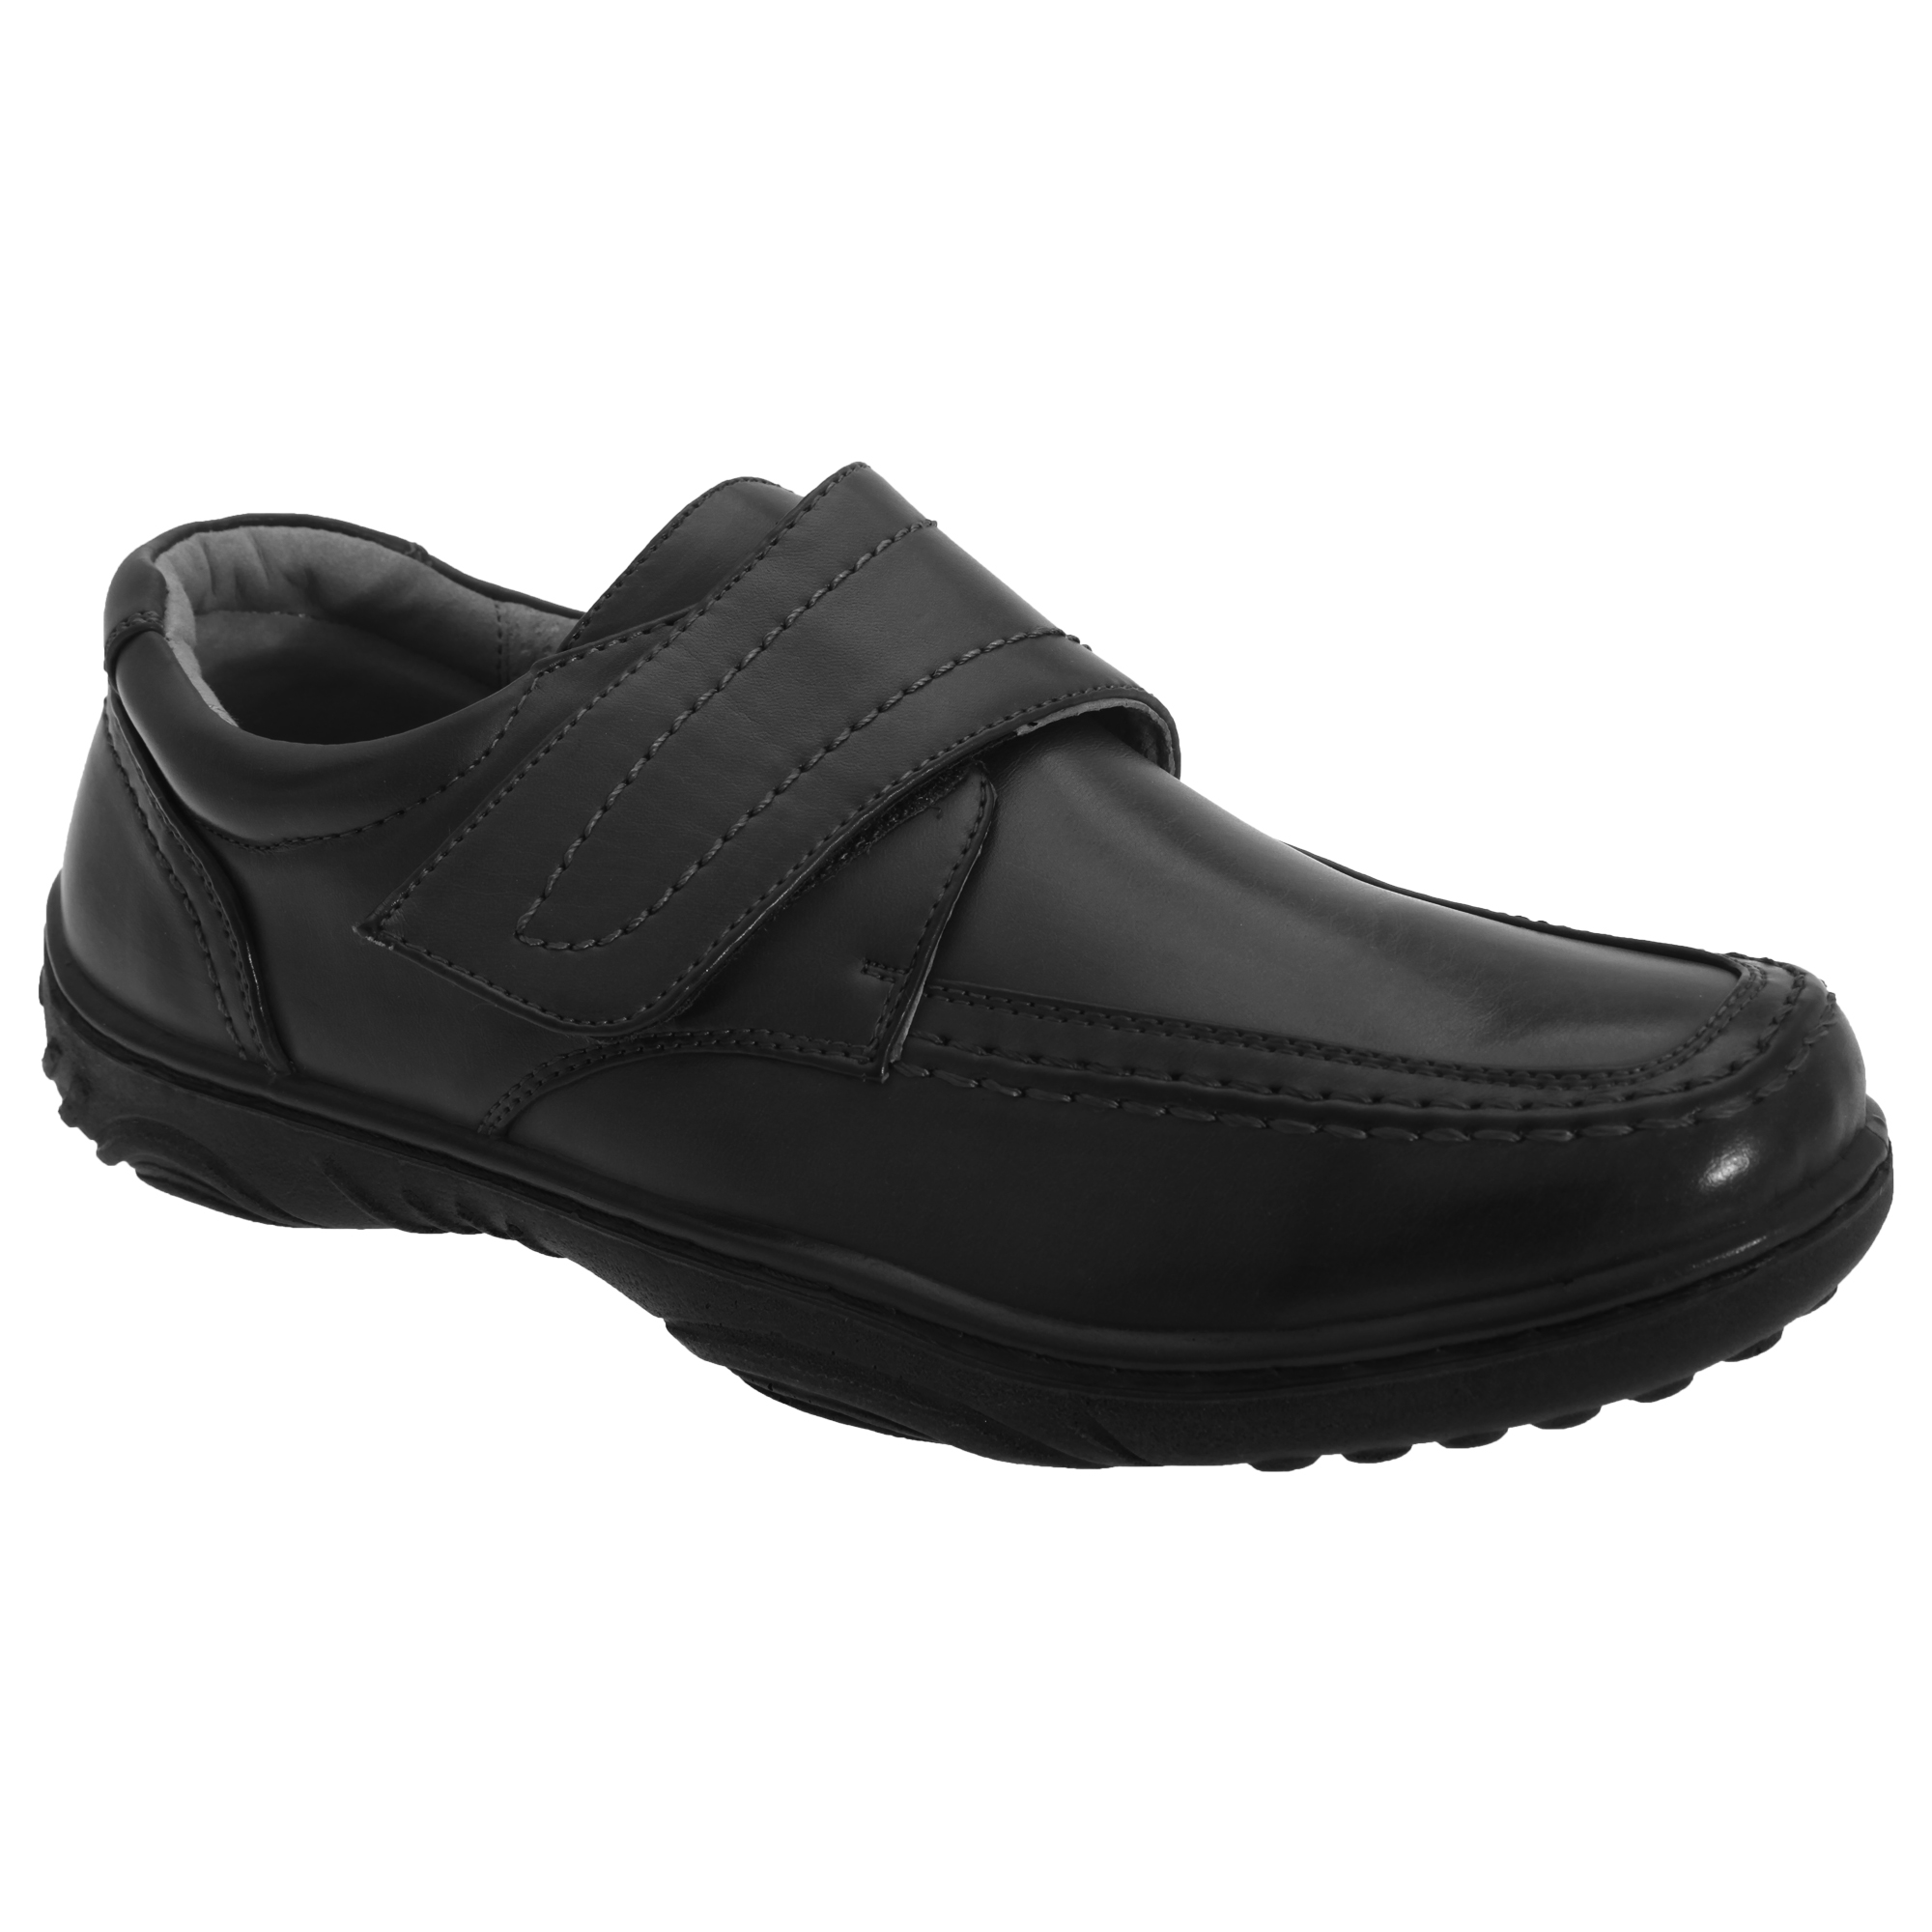 Smart Uns Mens Touch Fastening Casual Shoes - image 1 of 2